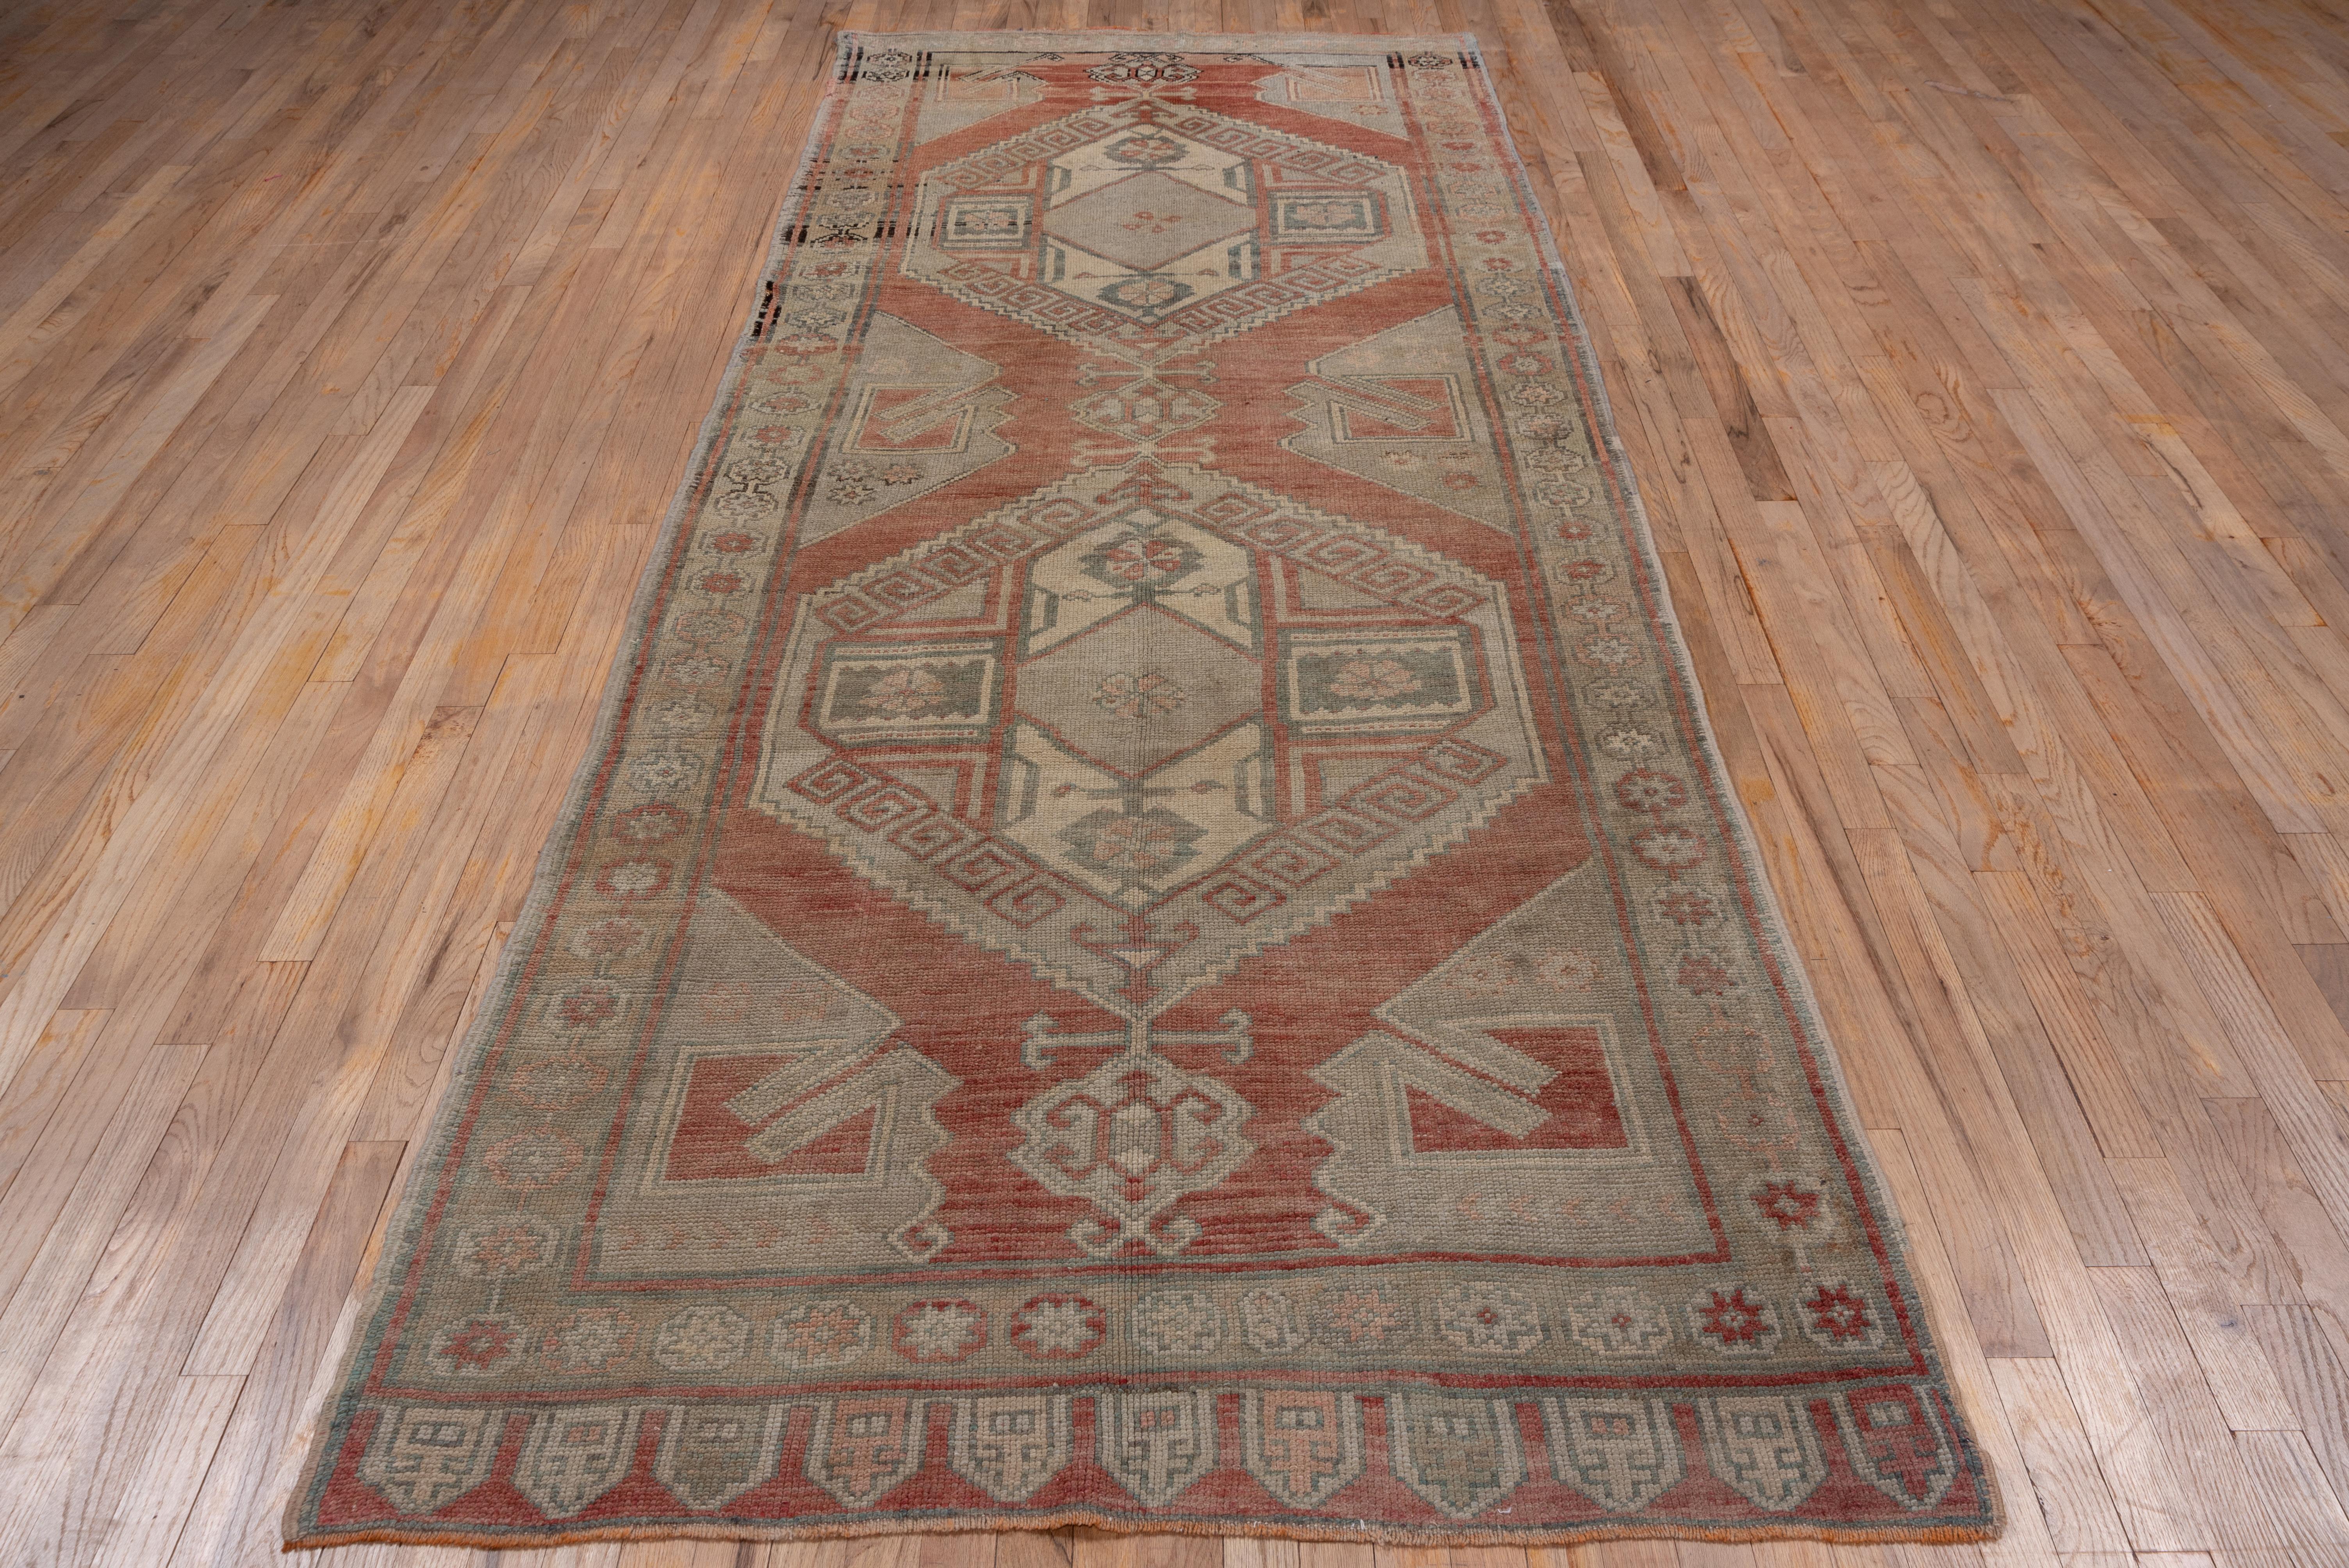 From the Karapinar subgroup, this salmon ground short gallery carpet shows two characteristic connected, stepped and hooked hexagonal medallions with cruciform centres and simple, pinched pendants, all in soft tones of buff, cream, pearl and